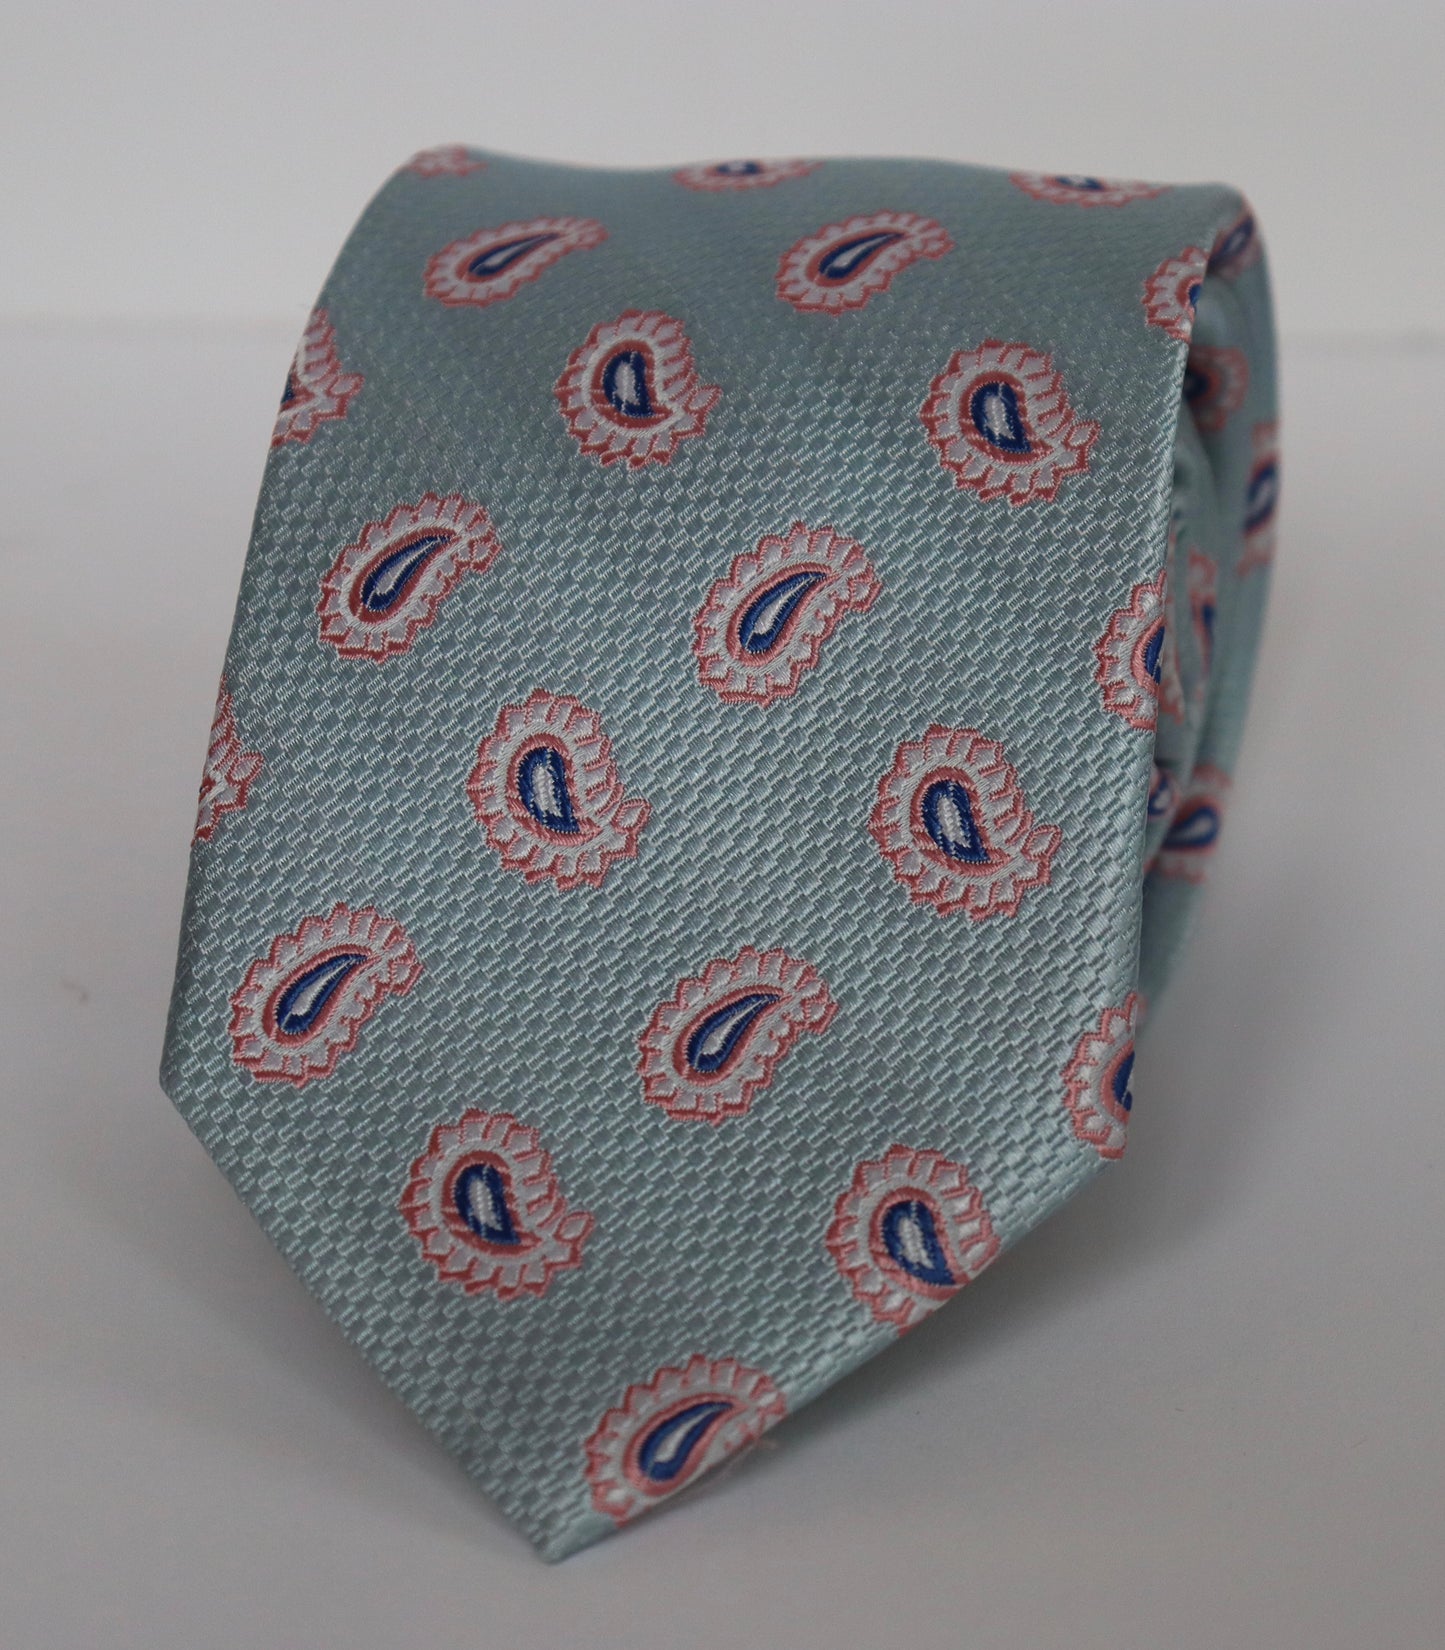 The Shirt Shop Tall Tie - Light Blue with Navy/Pink Paisley Pattern